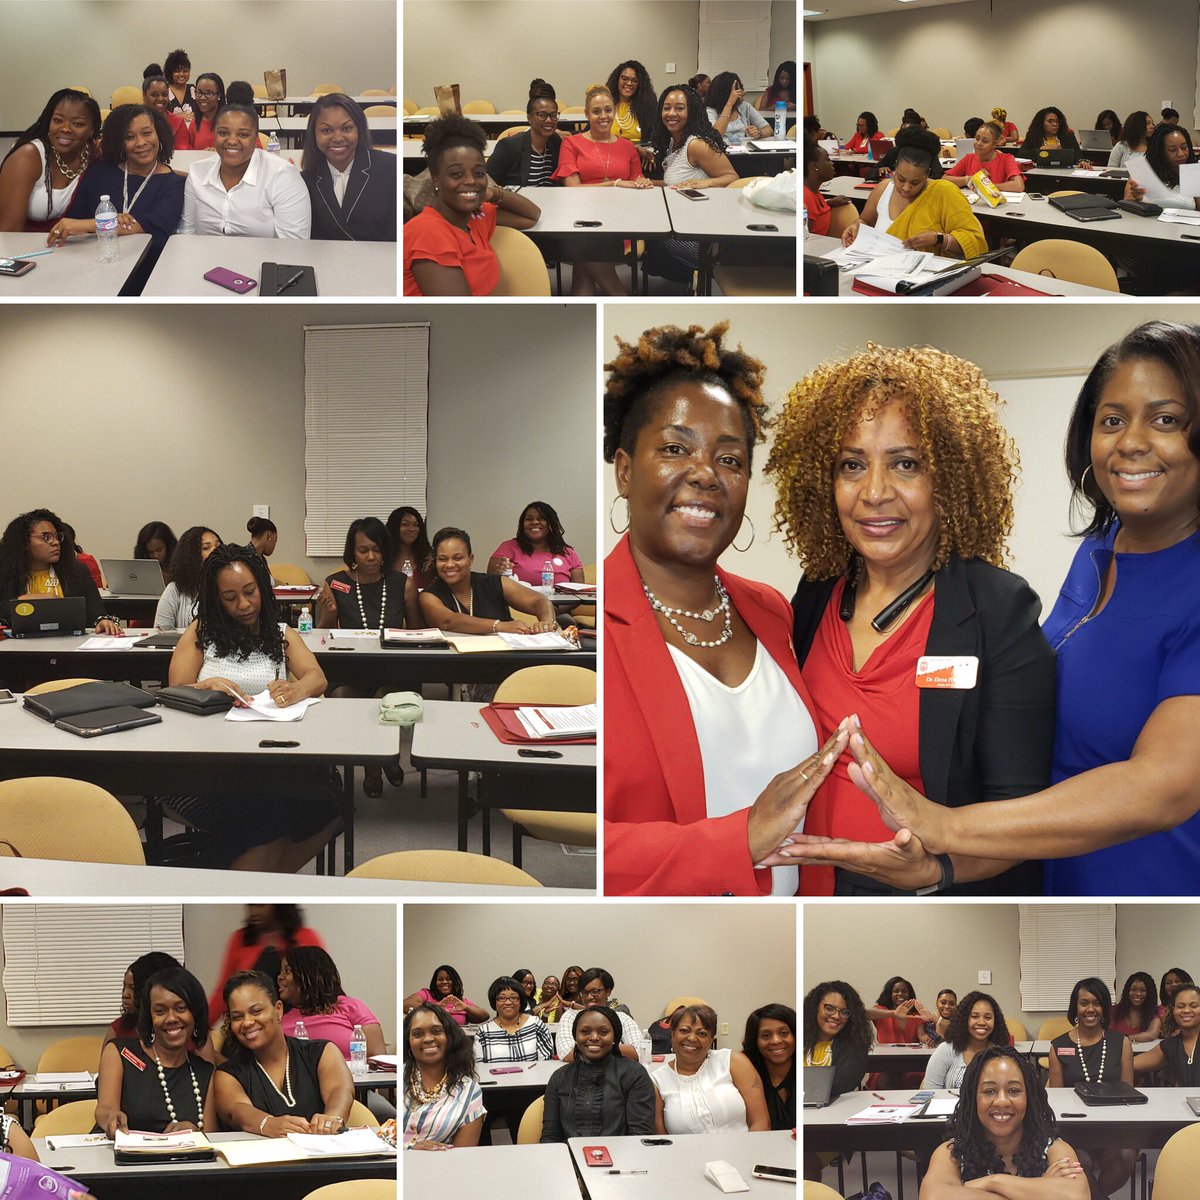 Thank you to our trainer, Soror Elena Ponder, Valdosta Alumnae Chapter for helping us grow in Delta! Sisterly shout out to our sorors from Augusta Alumnae and Marietta Roswell Alumnae who joined us #alwayslearning #DeltaGrowth #dst1913 #dstwrac